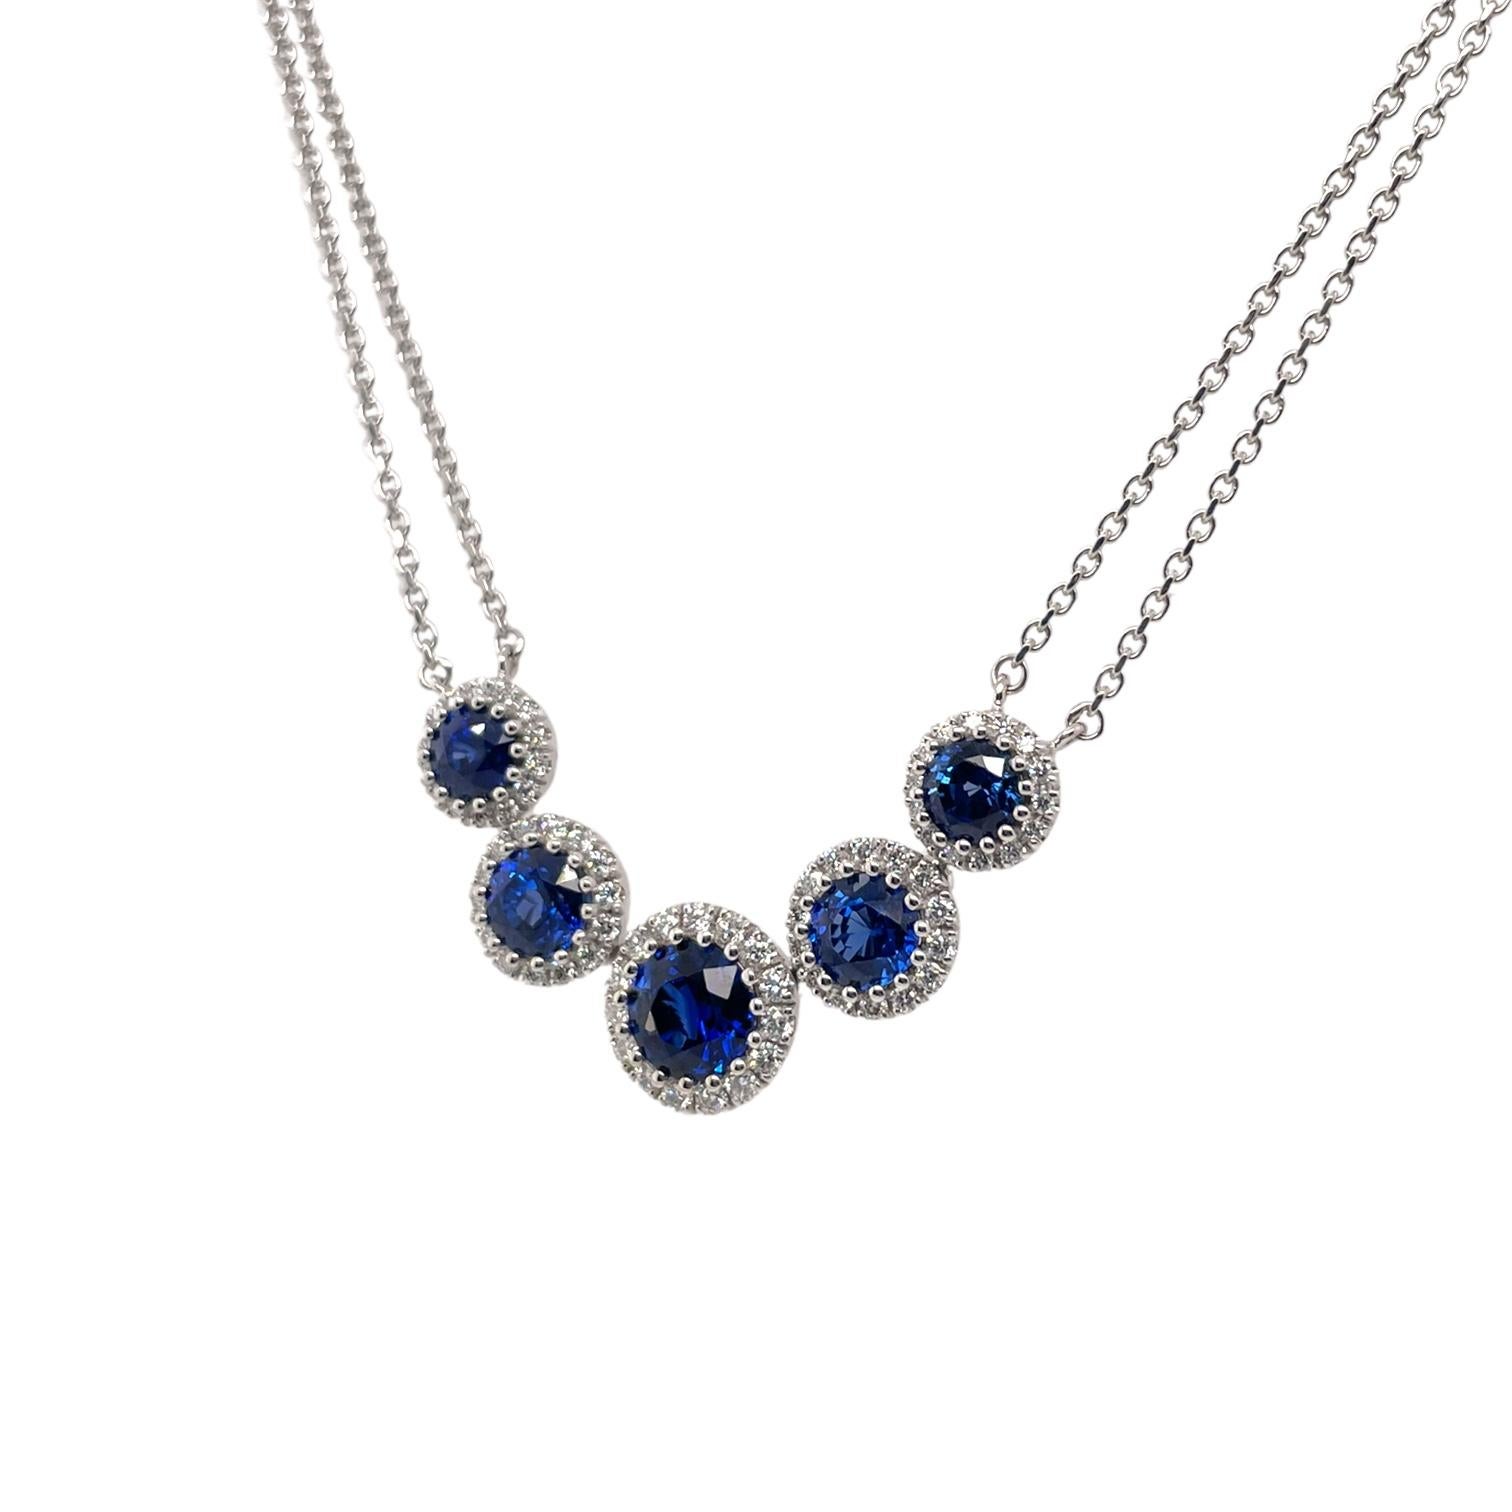 Sapphire and diamond cluster necklace in 14k white gold. Necklace contains 5 round brilliant sapphires, 2.80tcw and round brilliant diamonds, 0.50tcw. Diamonds are near colorless and SI1 in clarity. Stones are all mounted in handmade prong settings.